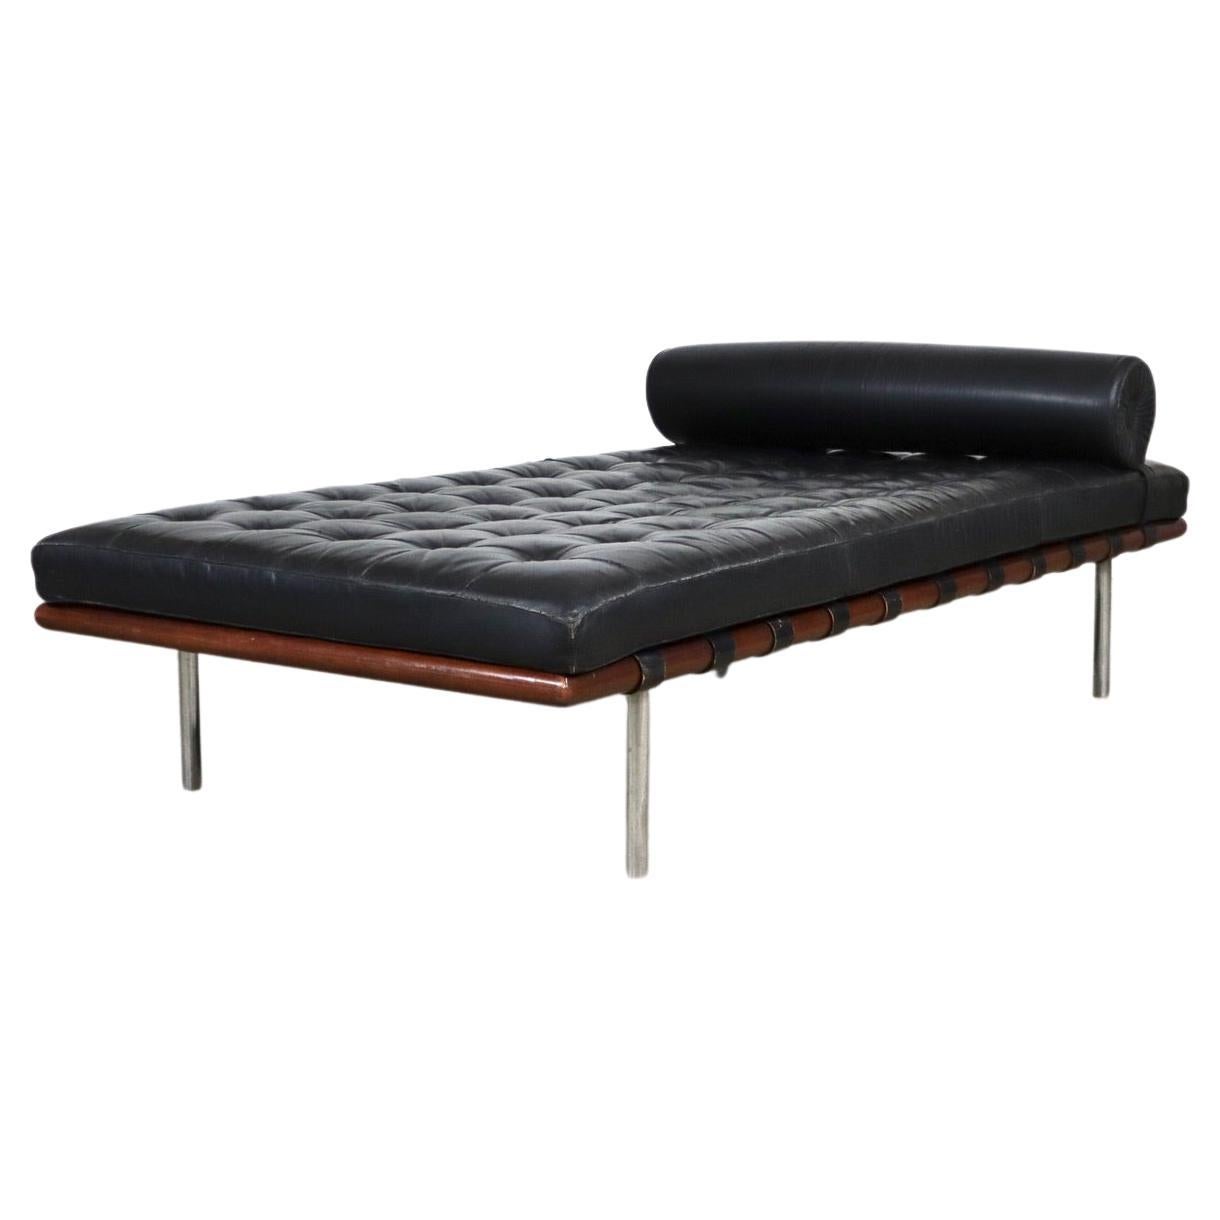 Vintage Knoll Barcelona daybed by Ludwig Mies van der Rohe